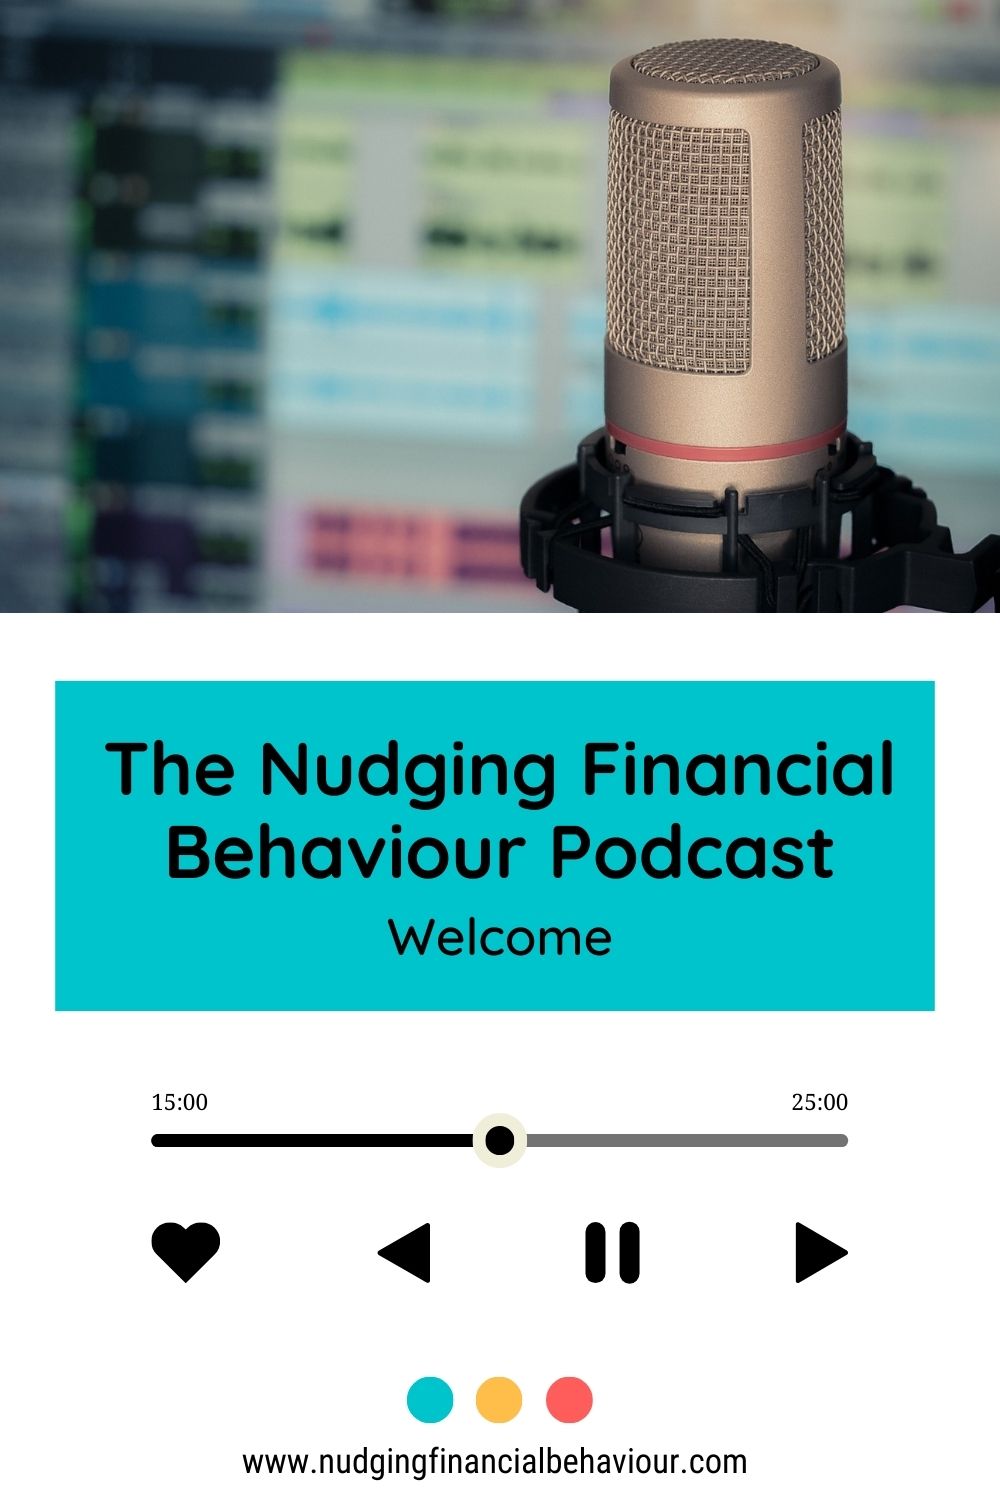 The Nudging Financial Behaviour Podcast